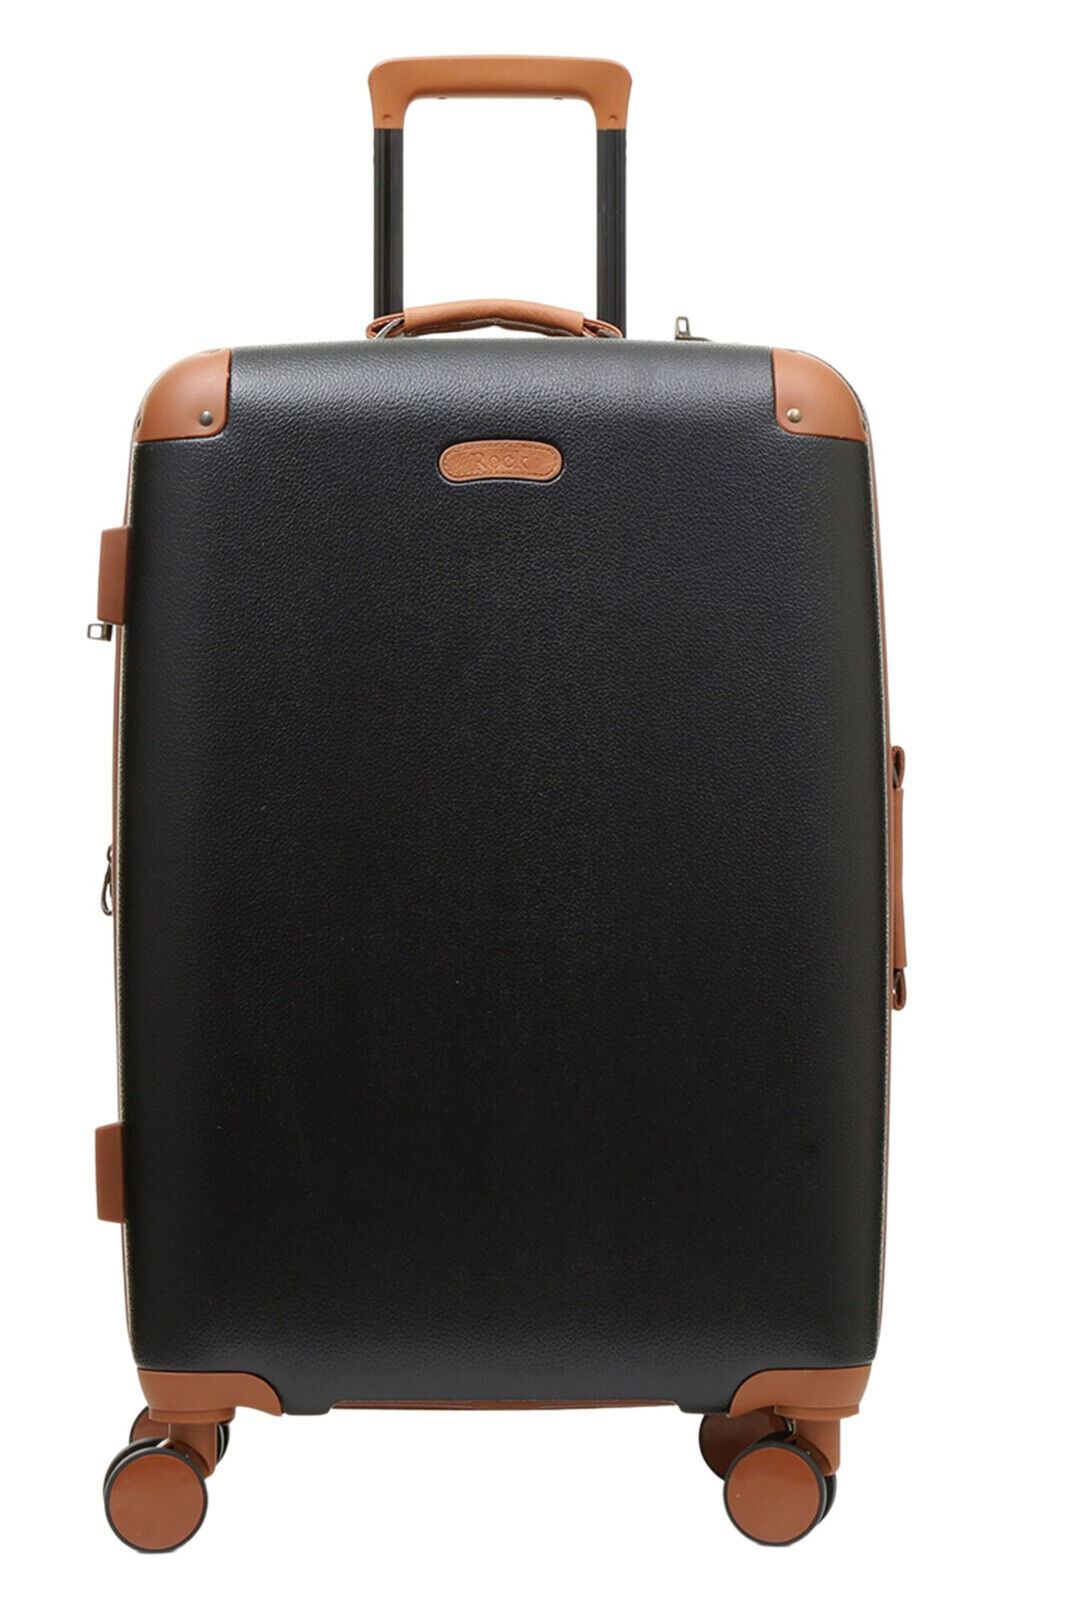 Anderson Medium Hard Shell Suitcase in Black